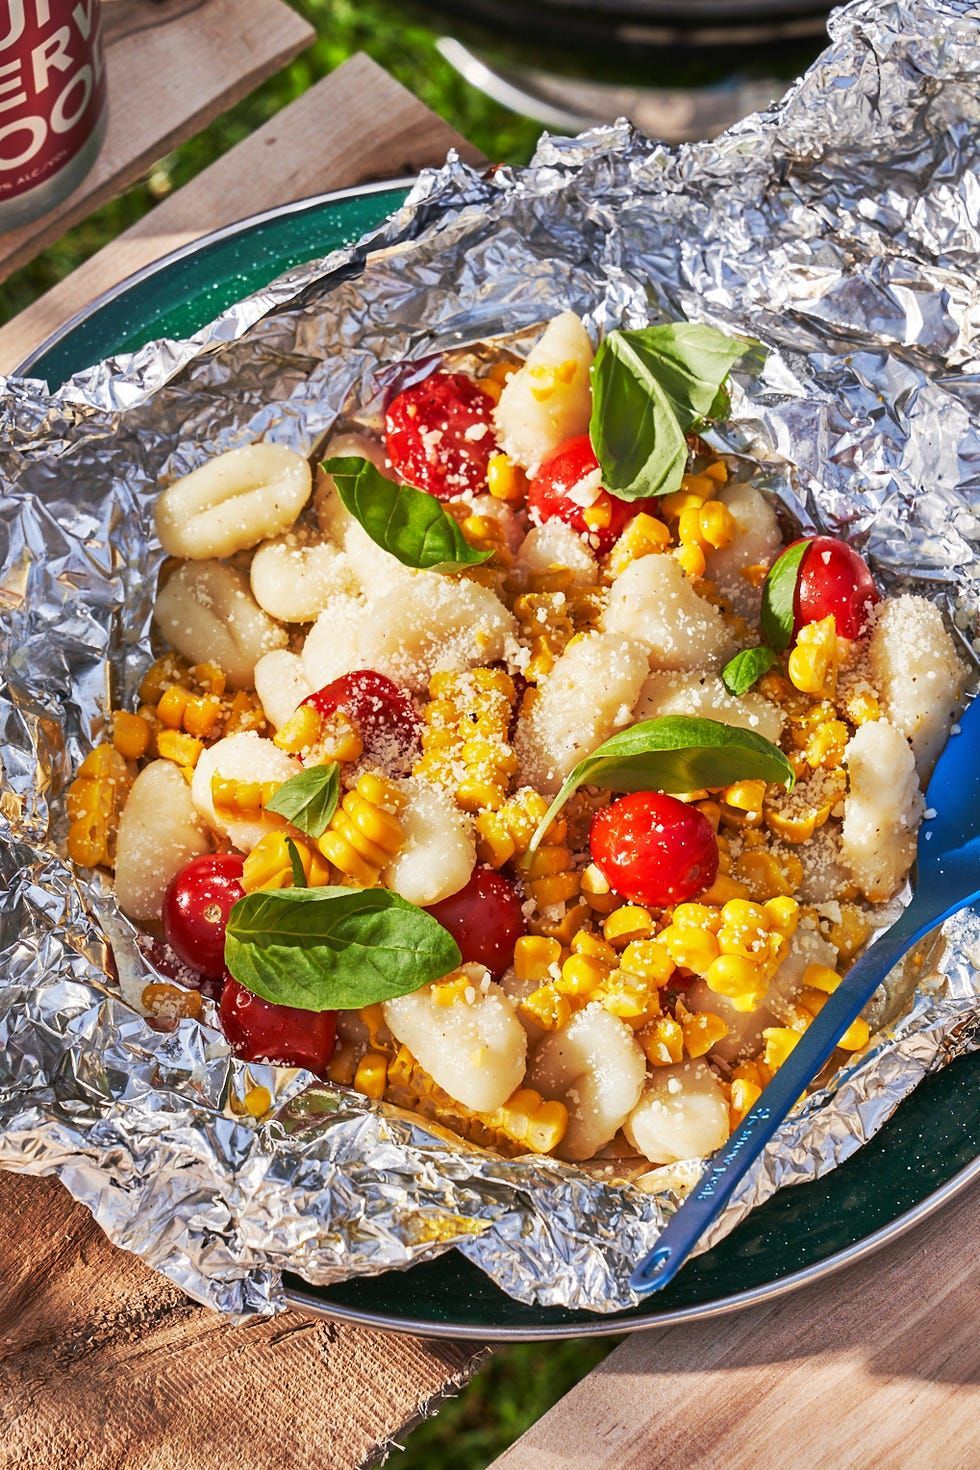 Camp Cooking Recipes